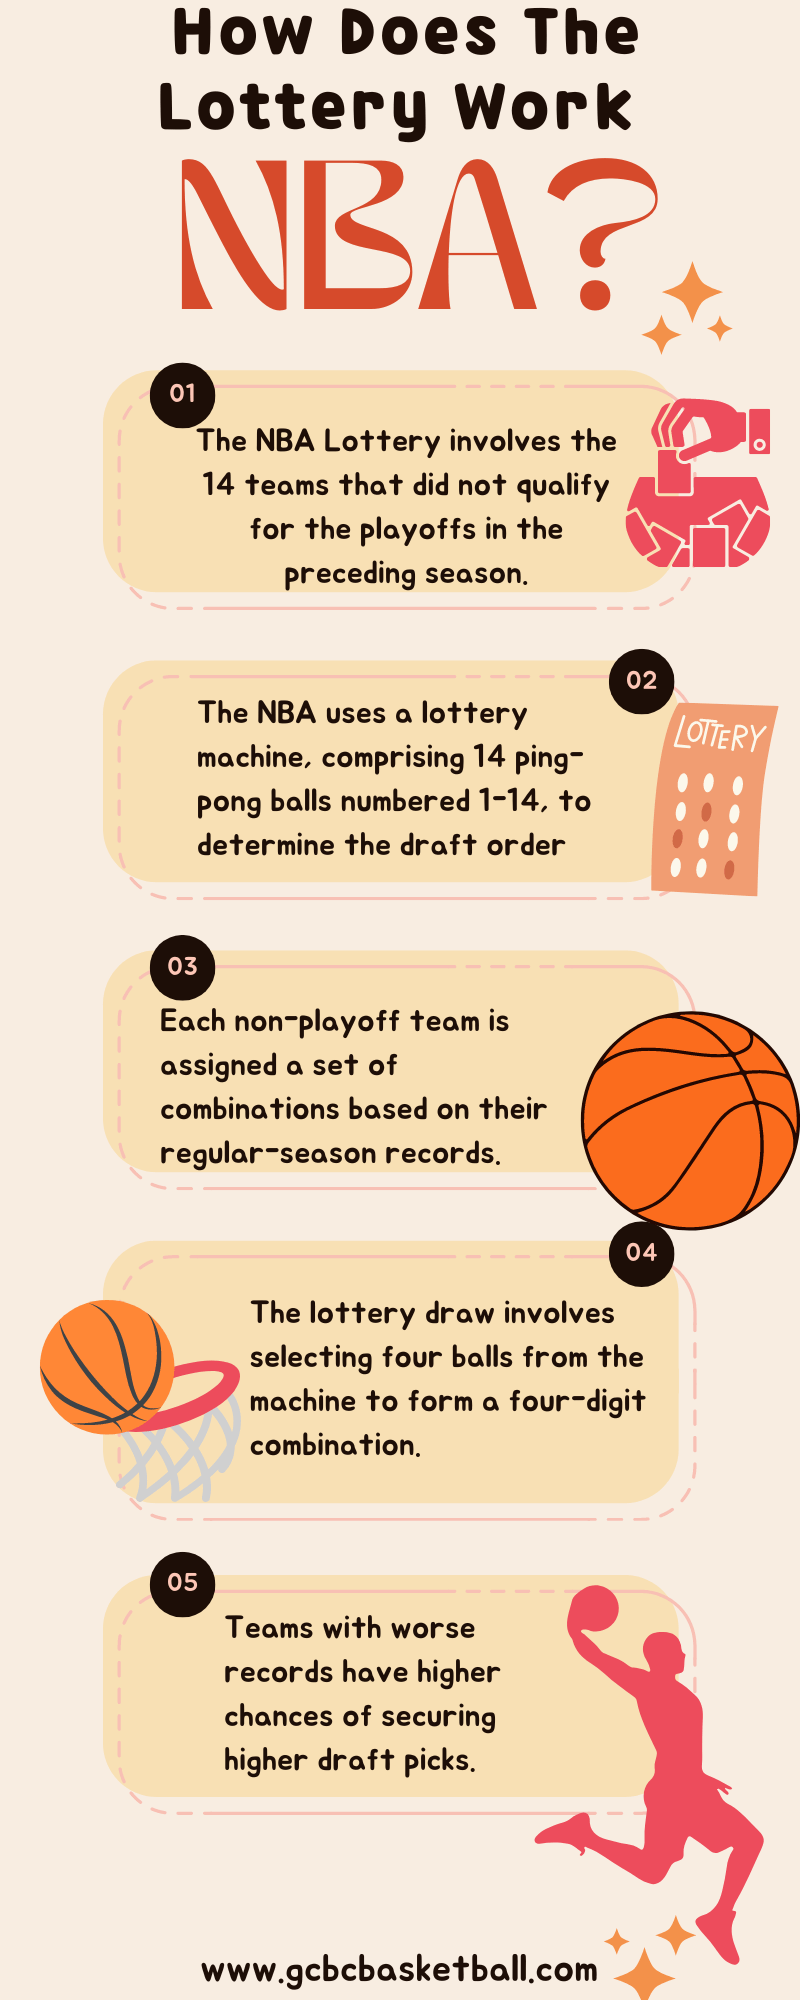 What Are The Odds For Each Team In The Draft Lottery?